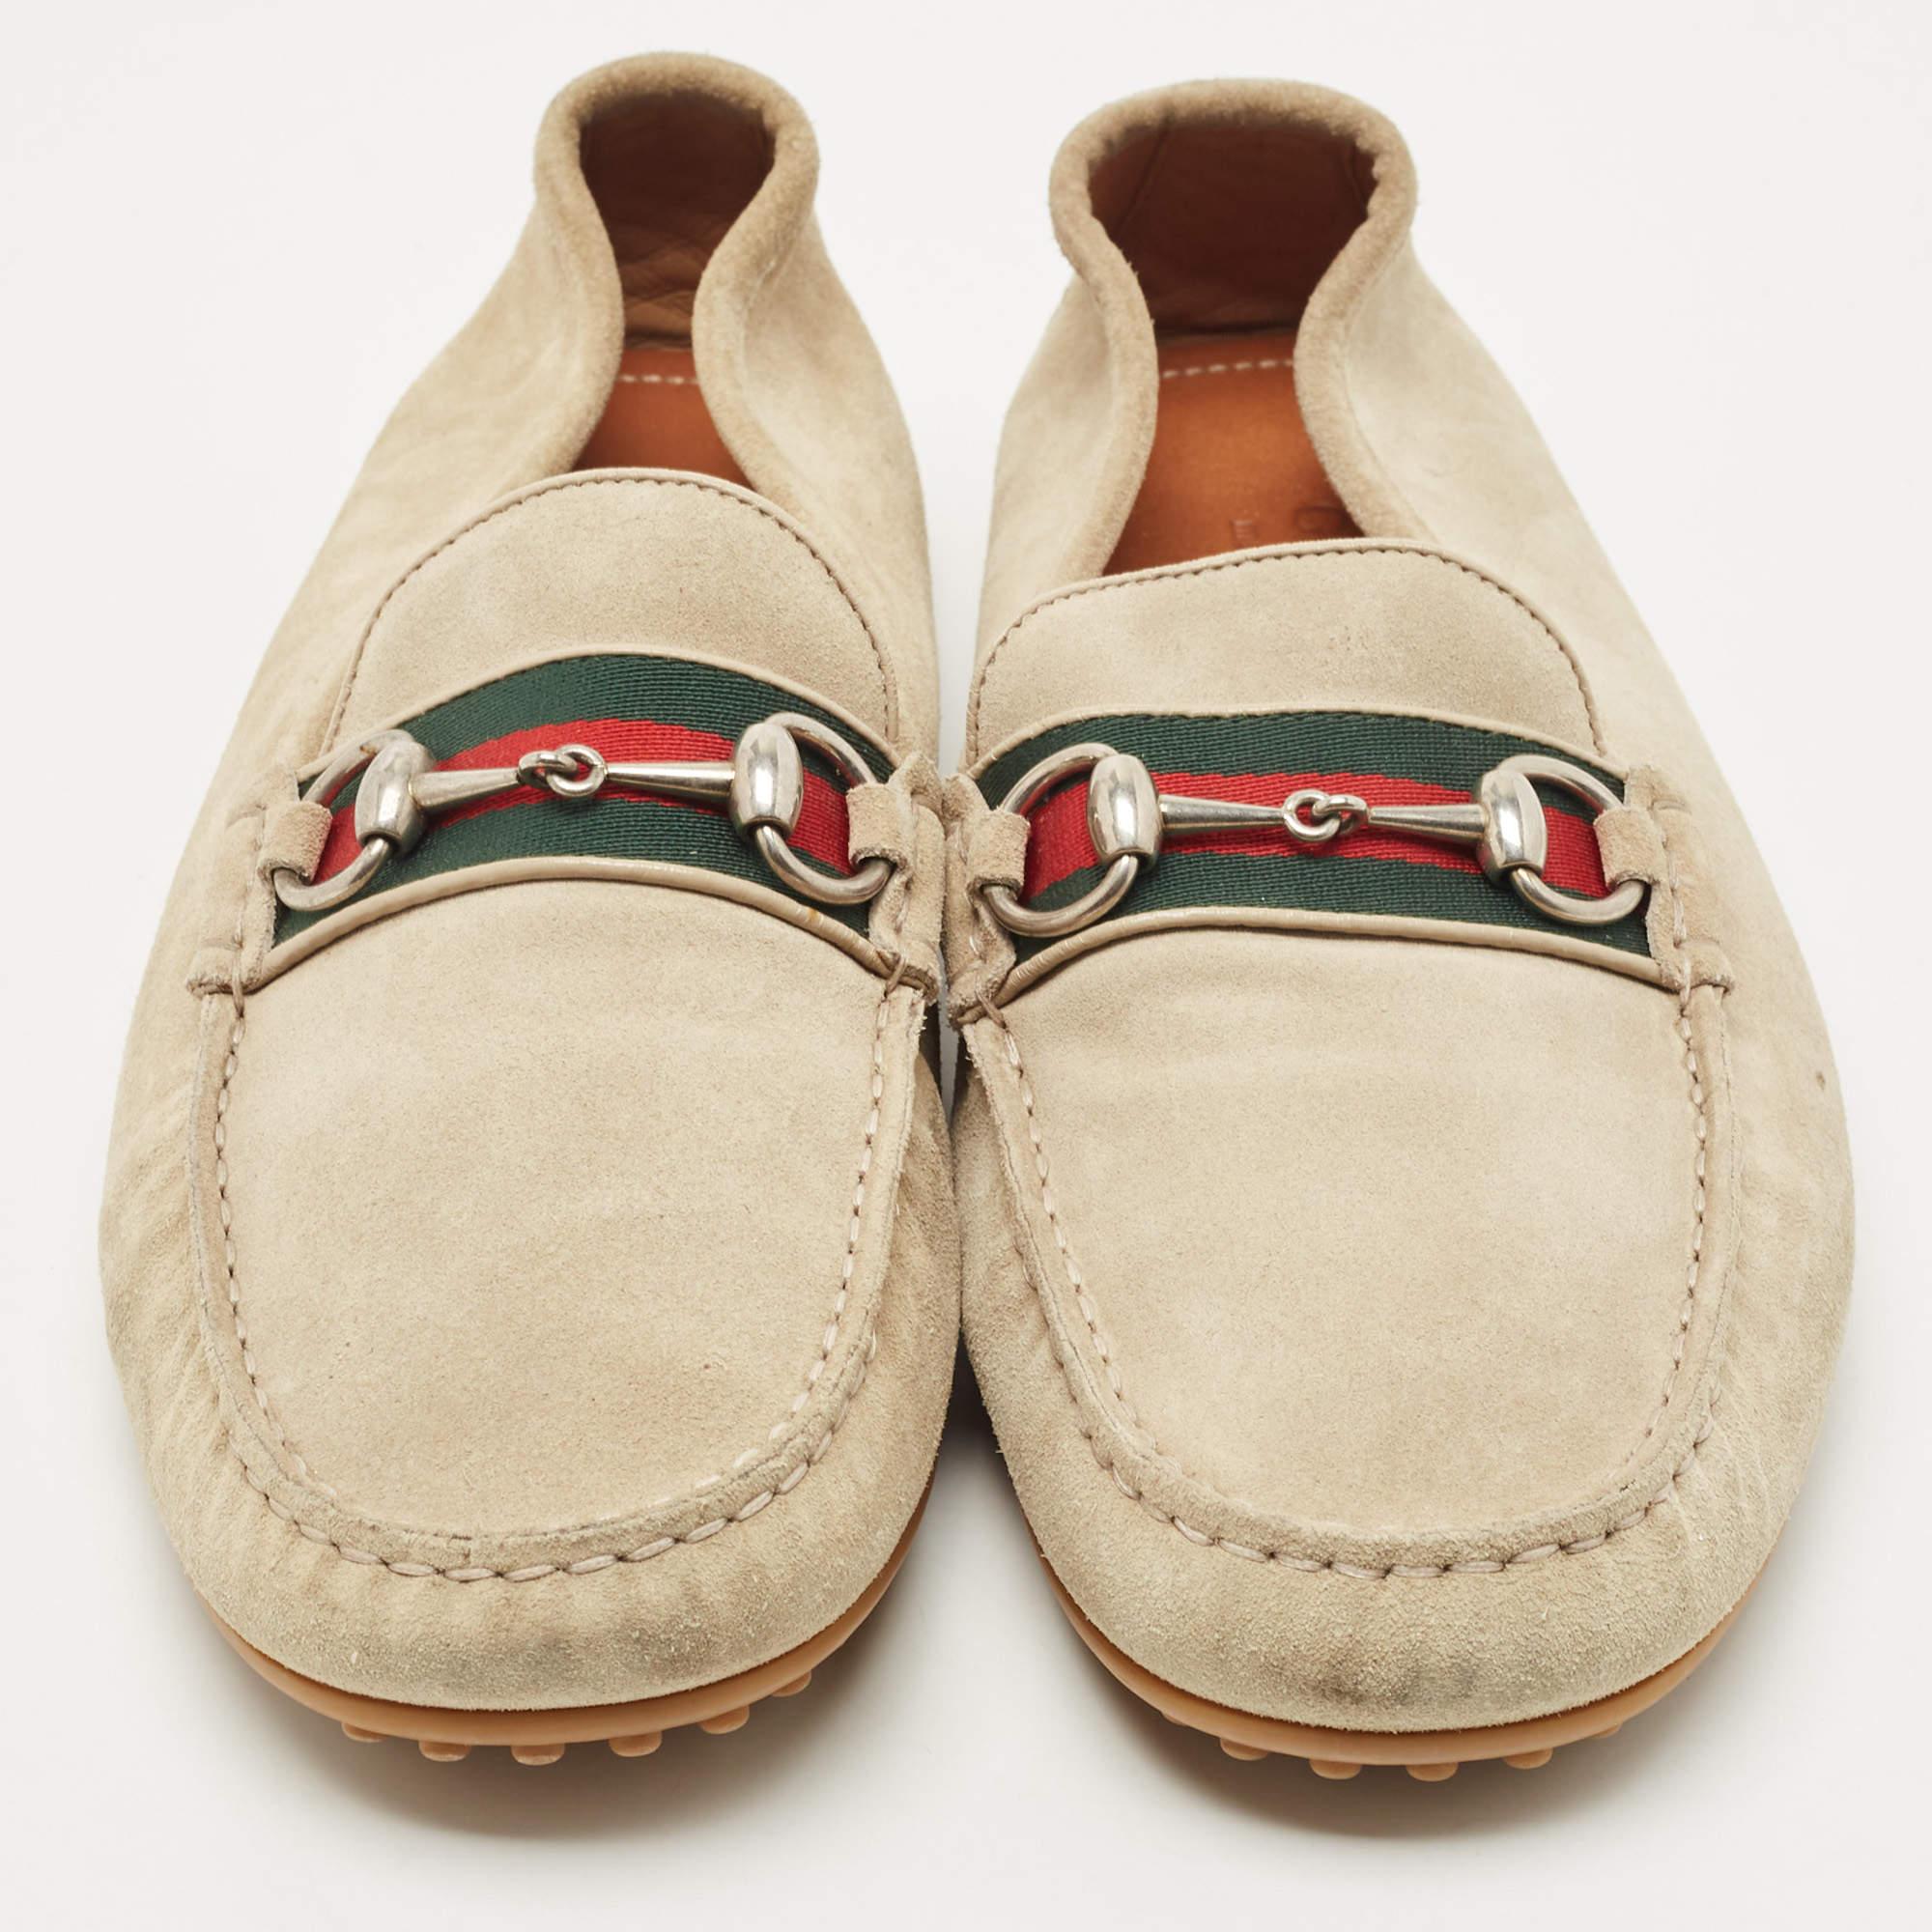 Embrace a dapper look with this pair of loafers from the house of Gucci. Exquisitely crafted from suede, these beige shoes impart an aura of luxurious class to your attire and make sure you can flaunt an effortlessly stylish look every time you step